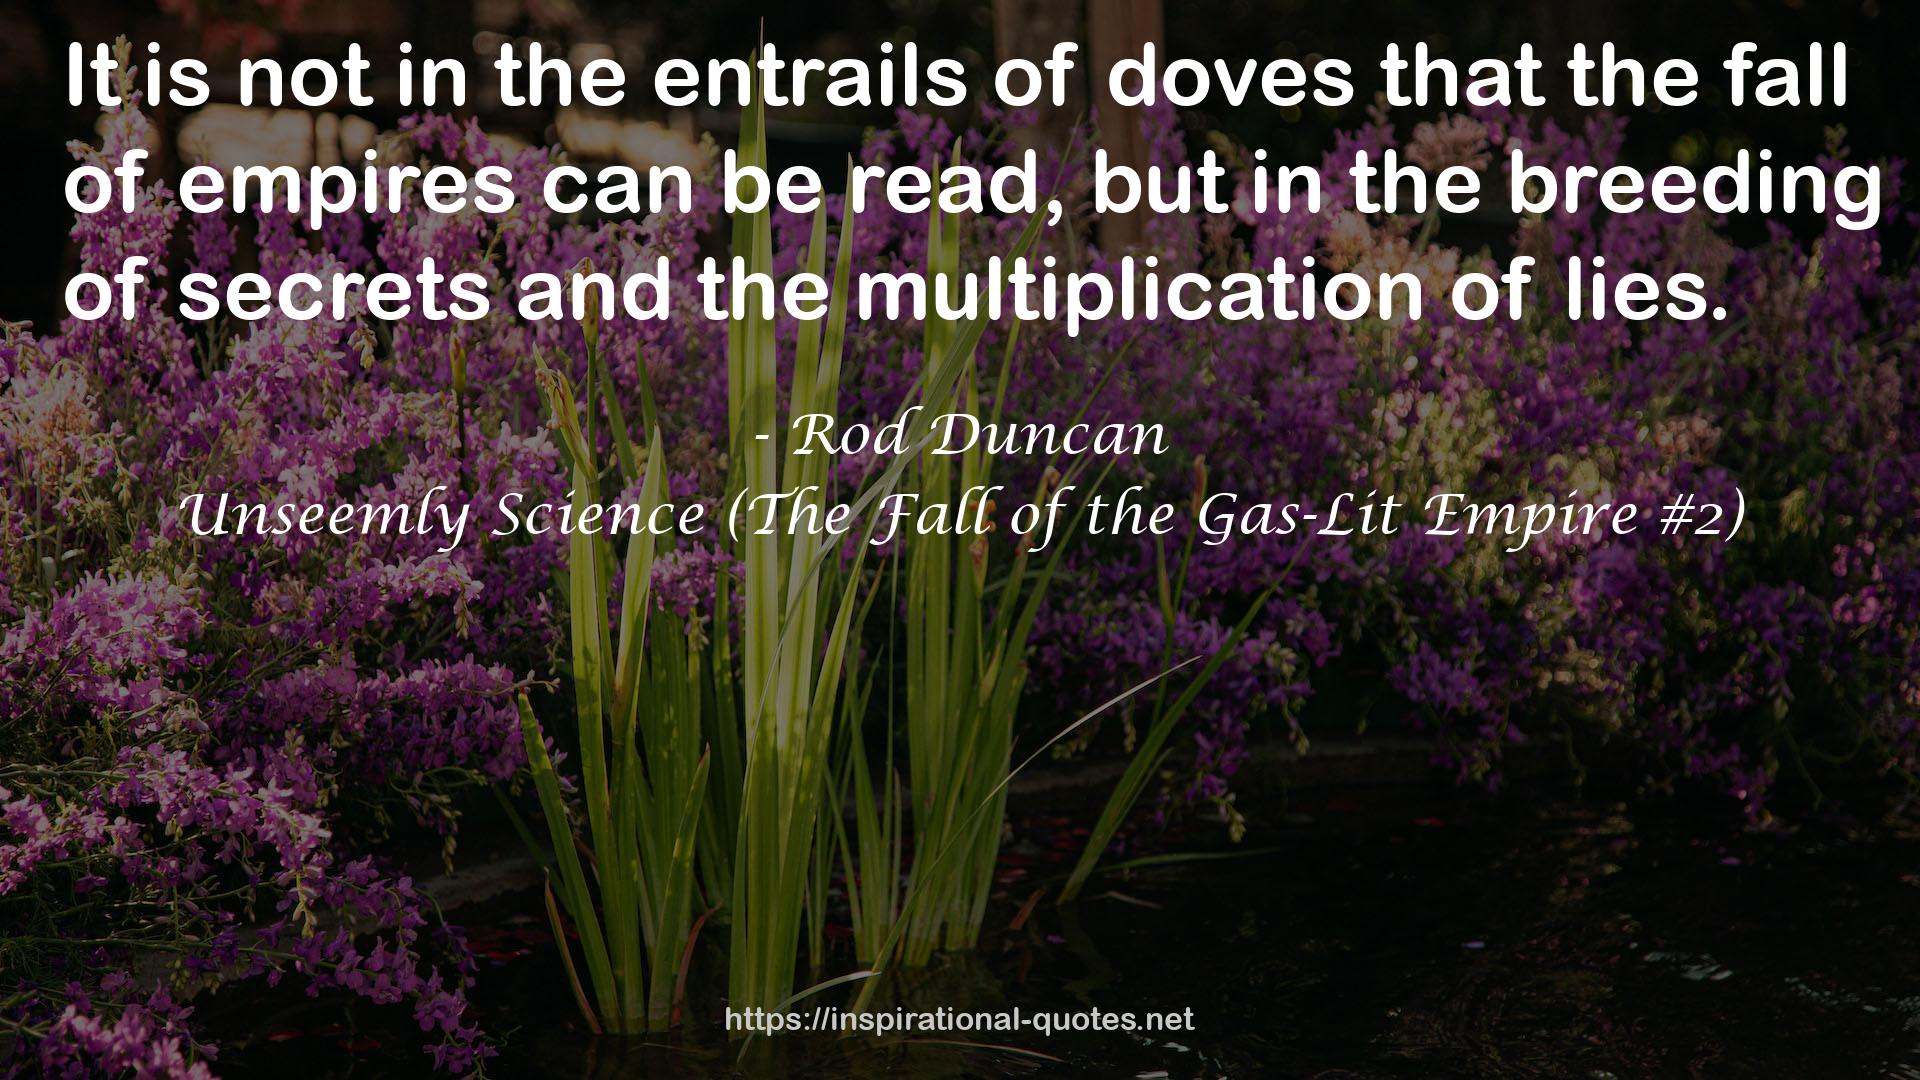 Rod Duncan QUOTES